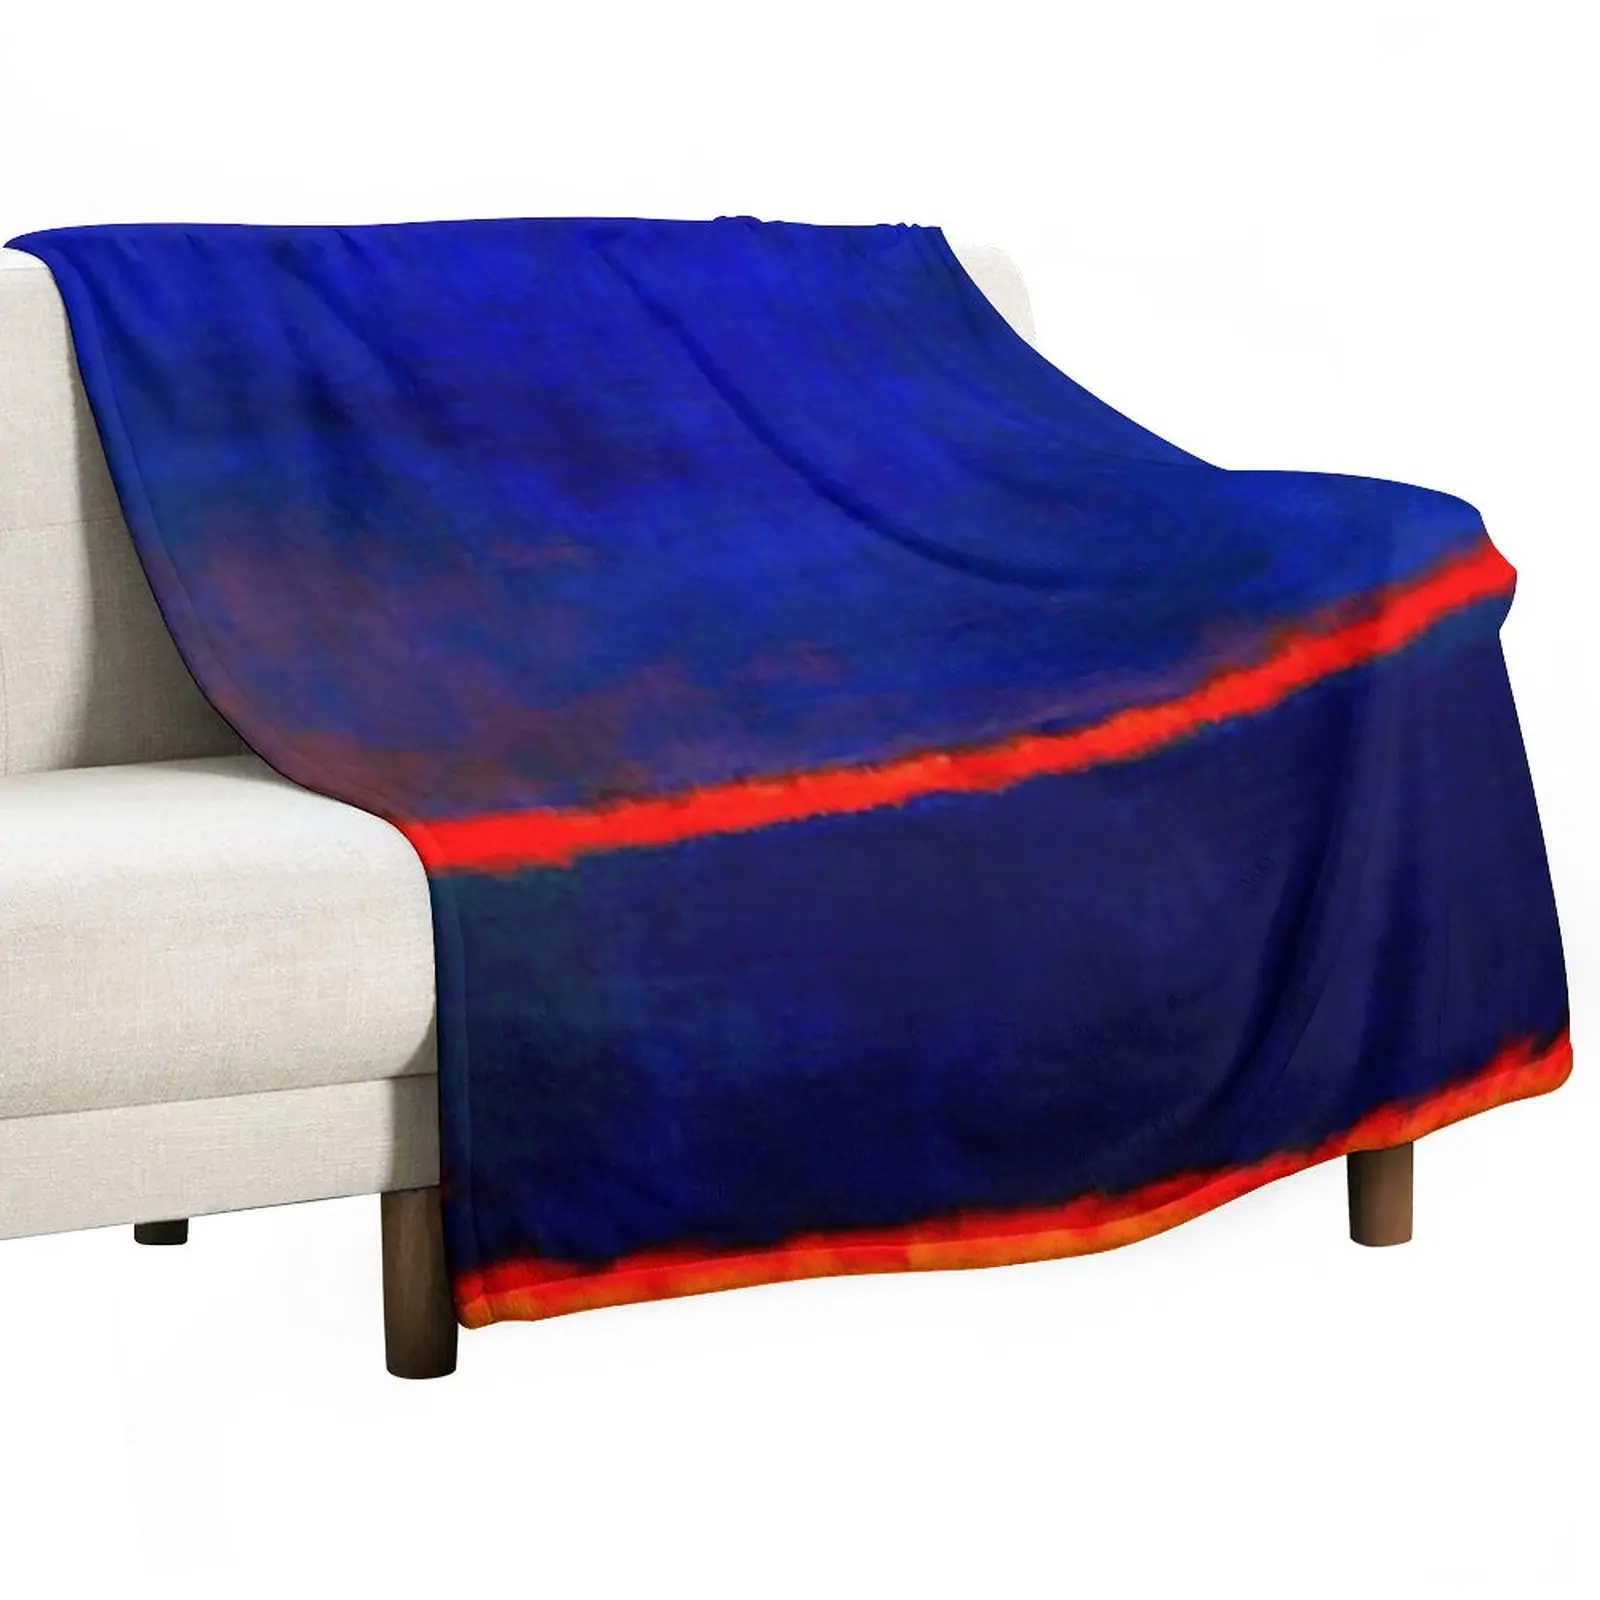 

New HQ blue orange red by mark rothko - high quality painting Throw Blanket Sleeping Bag Blanket sofa bed